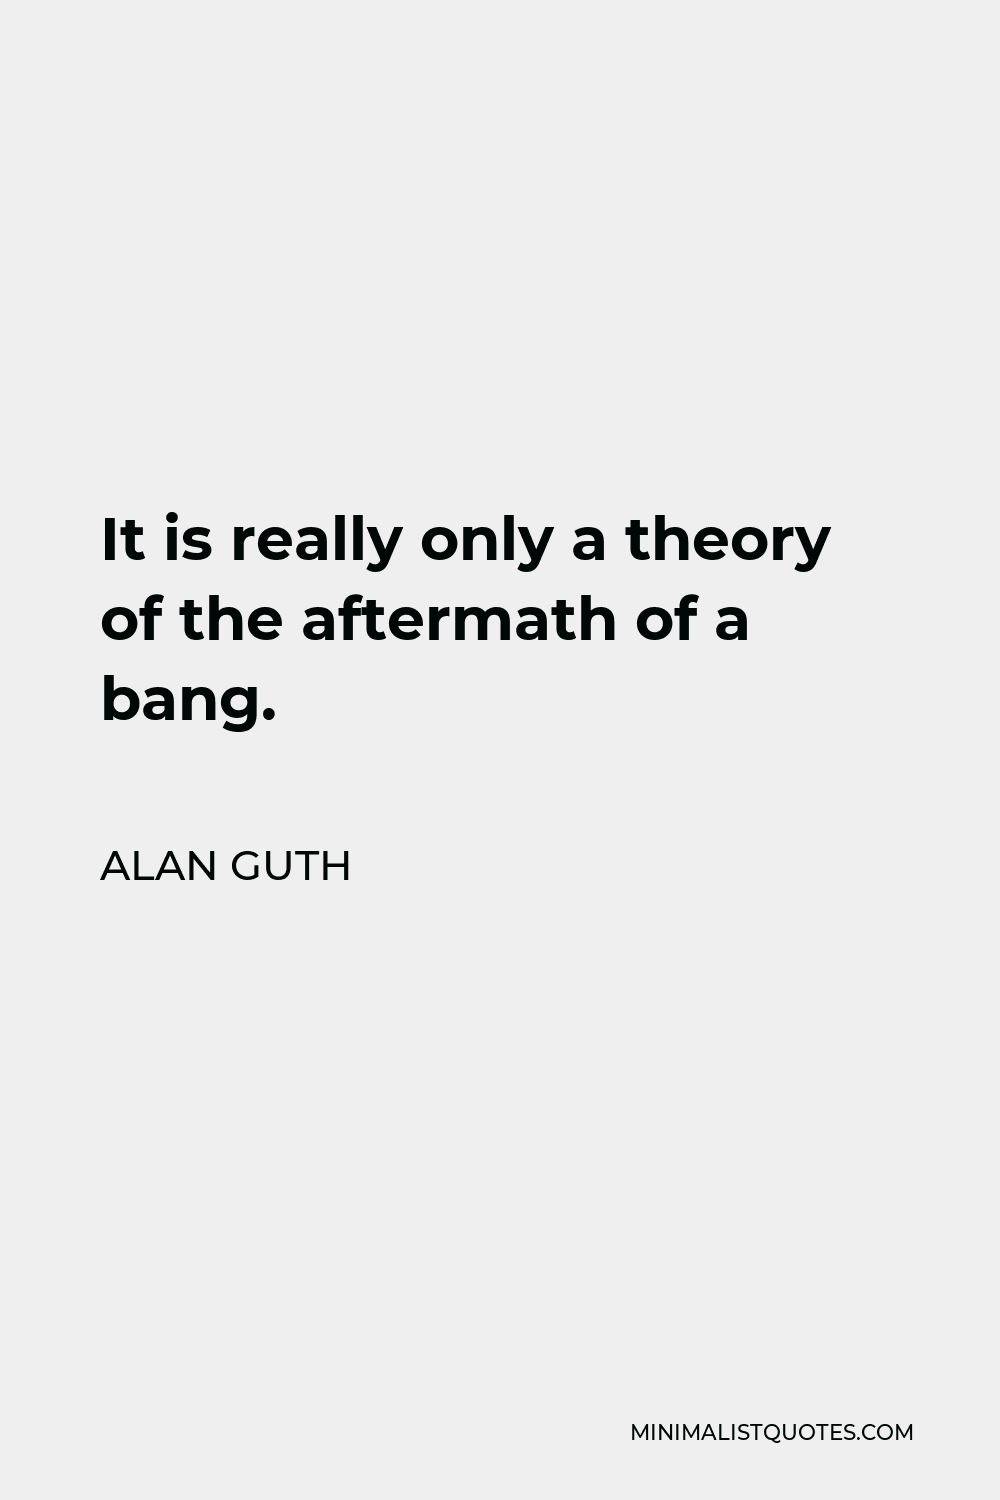 Alan Guth Quote - It is really only a theory of the aftermath of a bang.